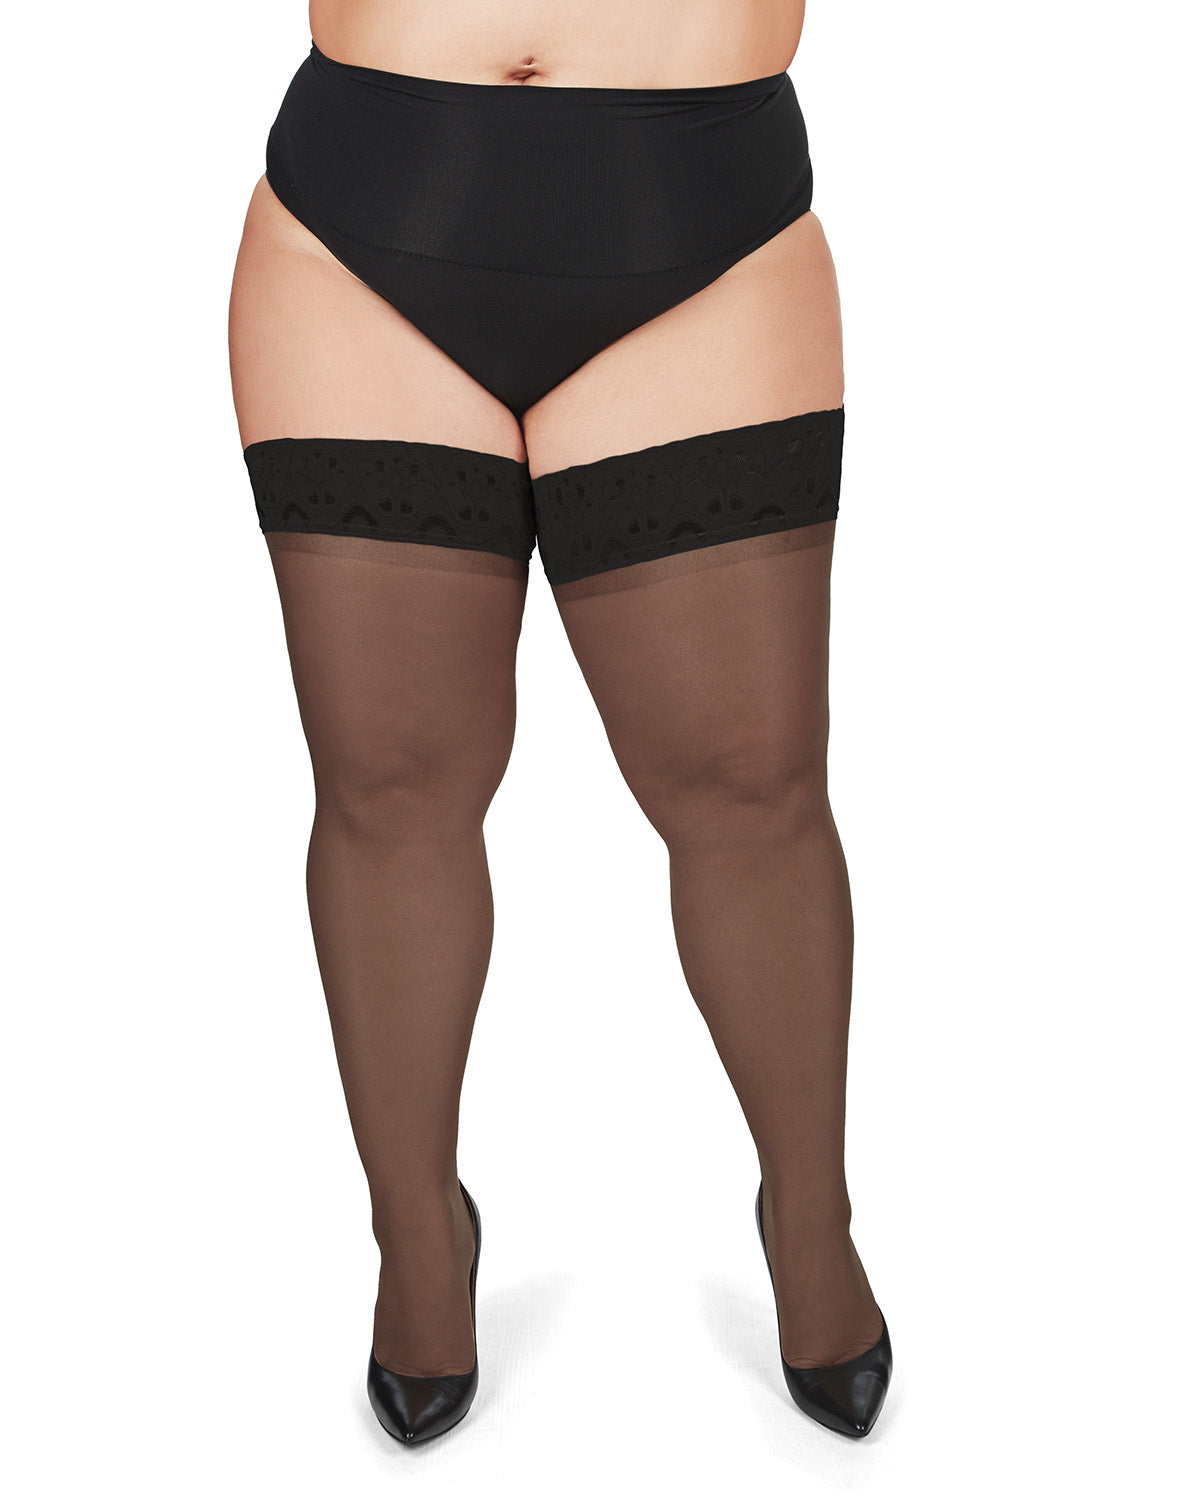 Queens Sized sheer tights 3x 4x 5x 6x 7x extra long/tall long or